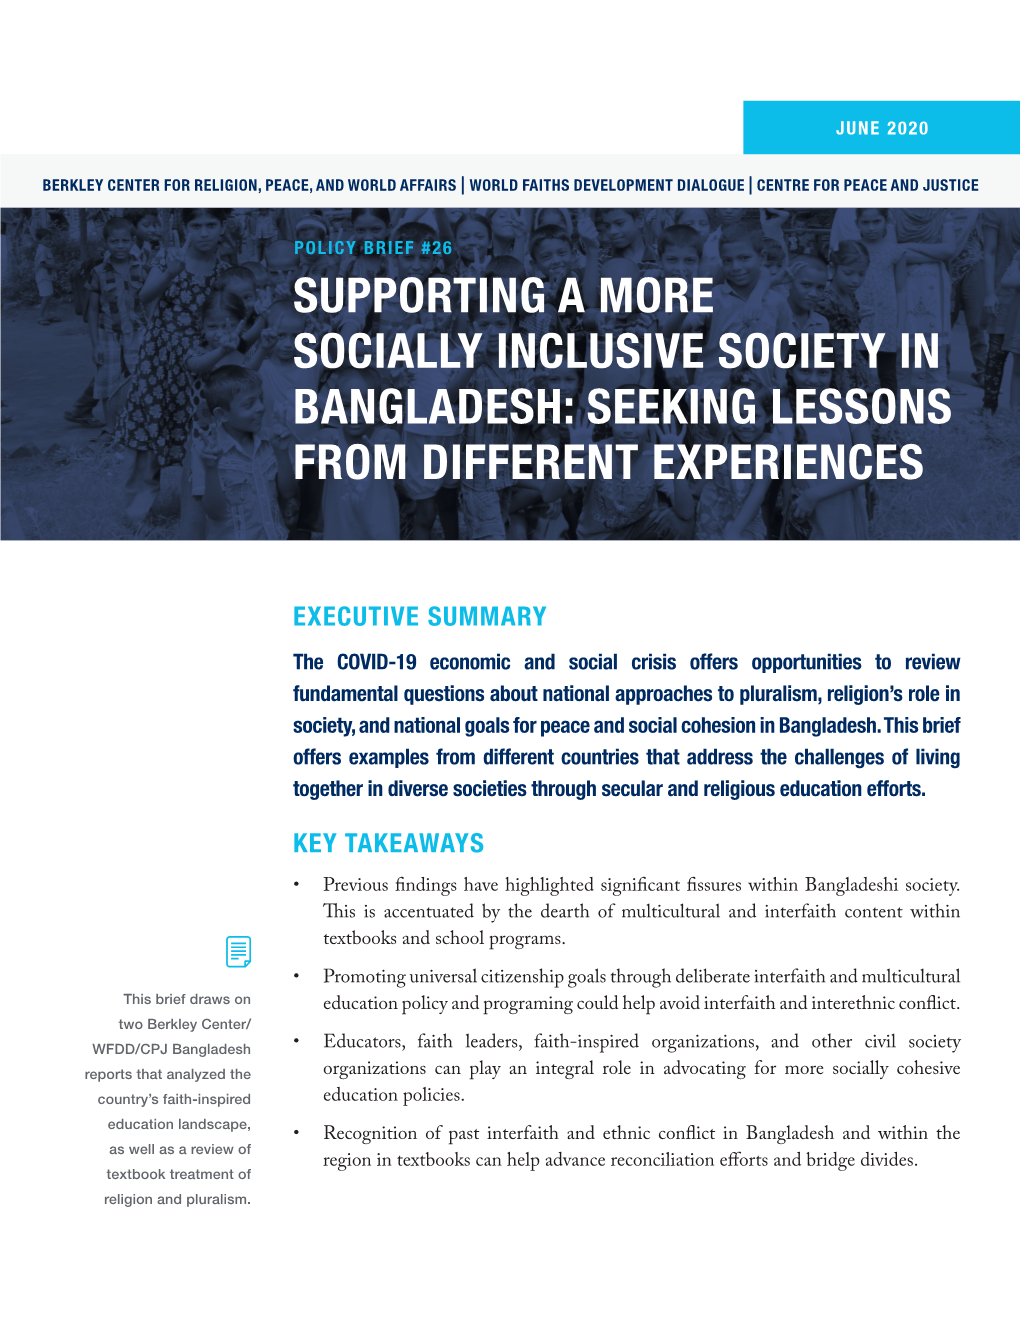 Supporting a More Socially Inclusive Society in Bangladesh: Seeking Lessons from Different Experiences